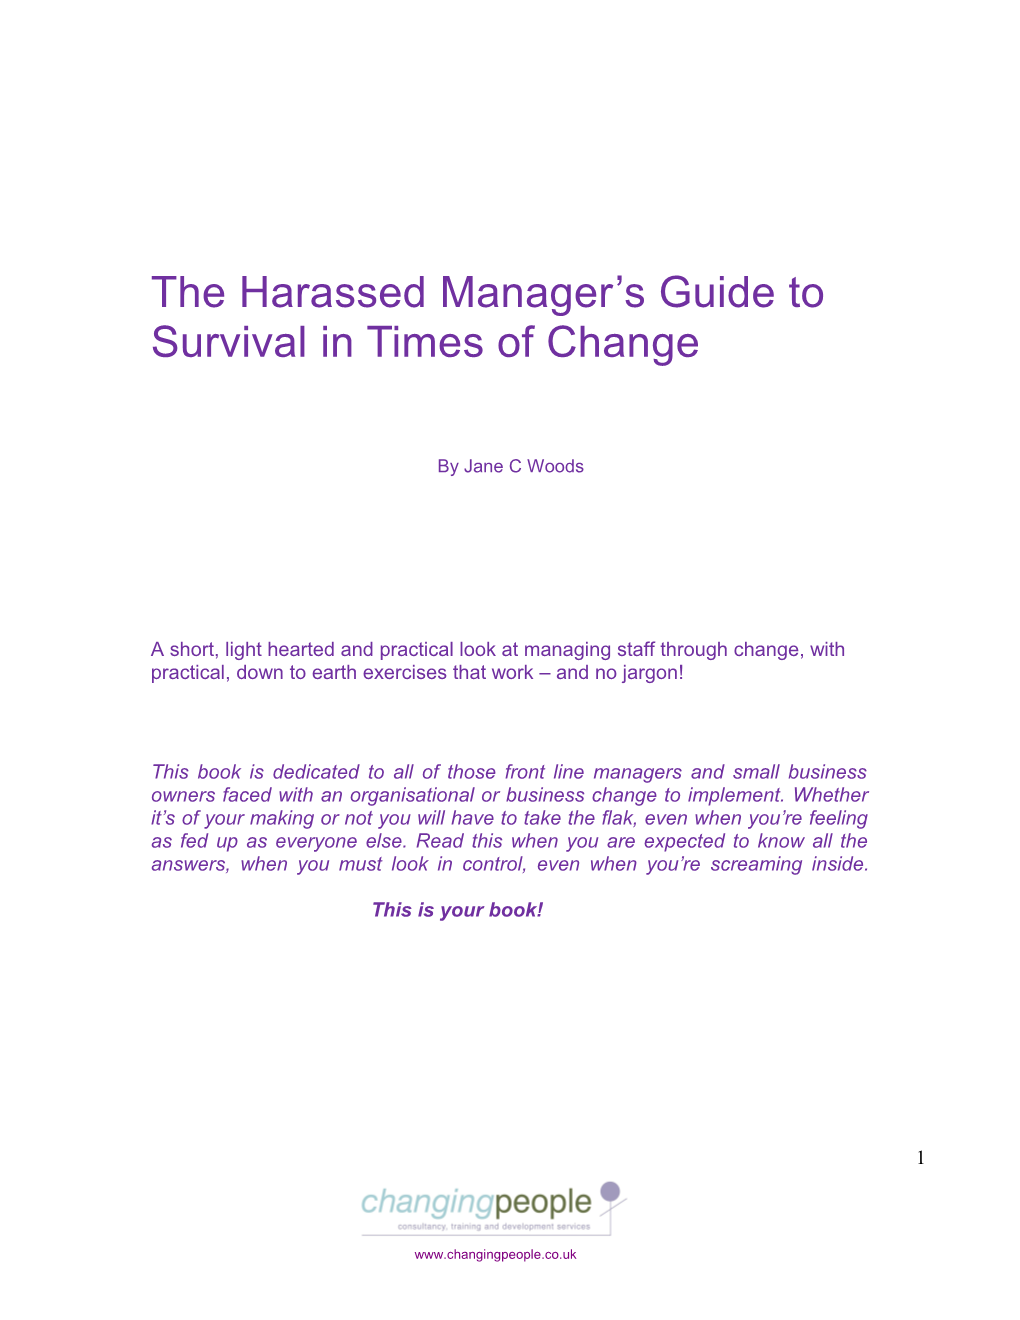 The Harassed Manager S Guide to Survival in Times of Change